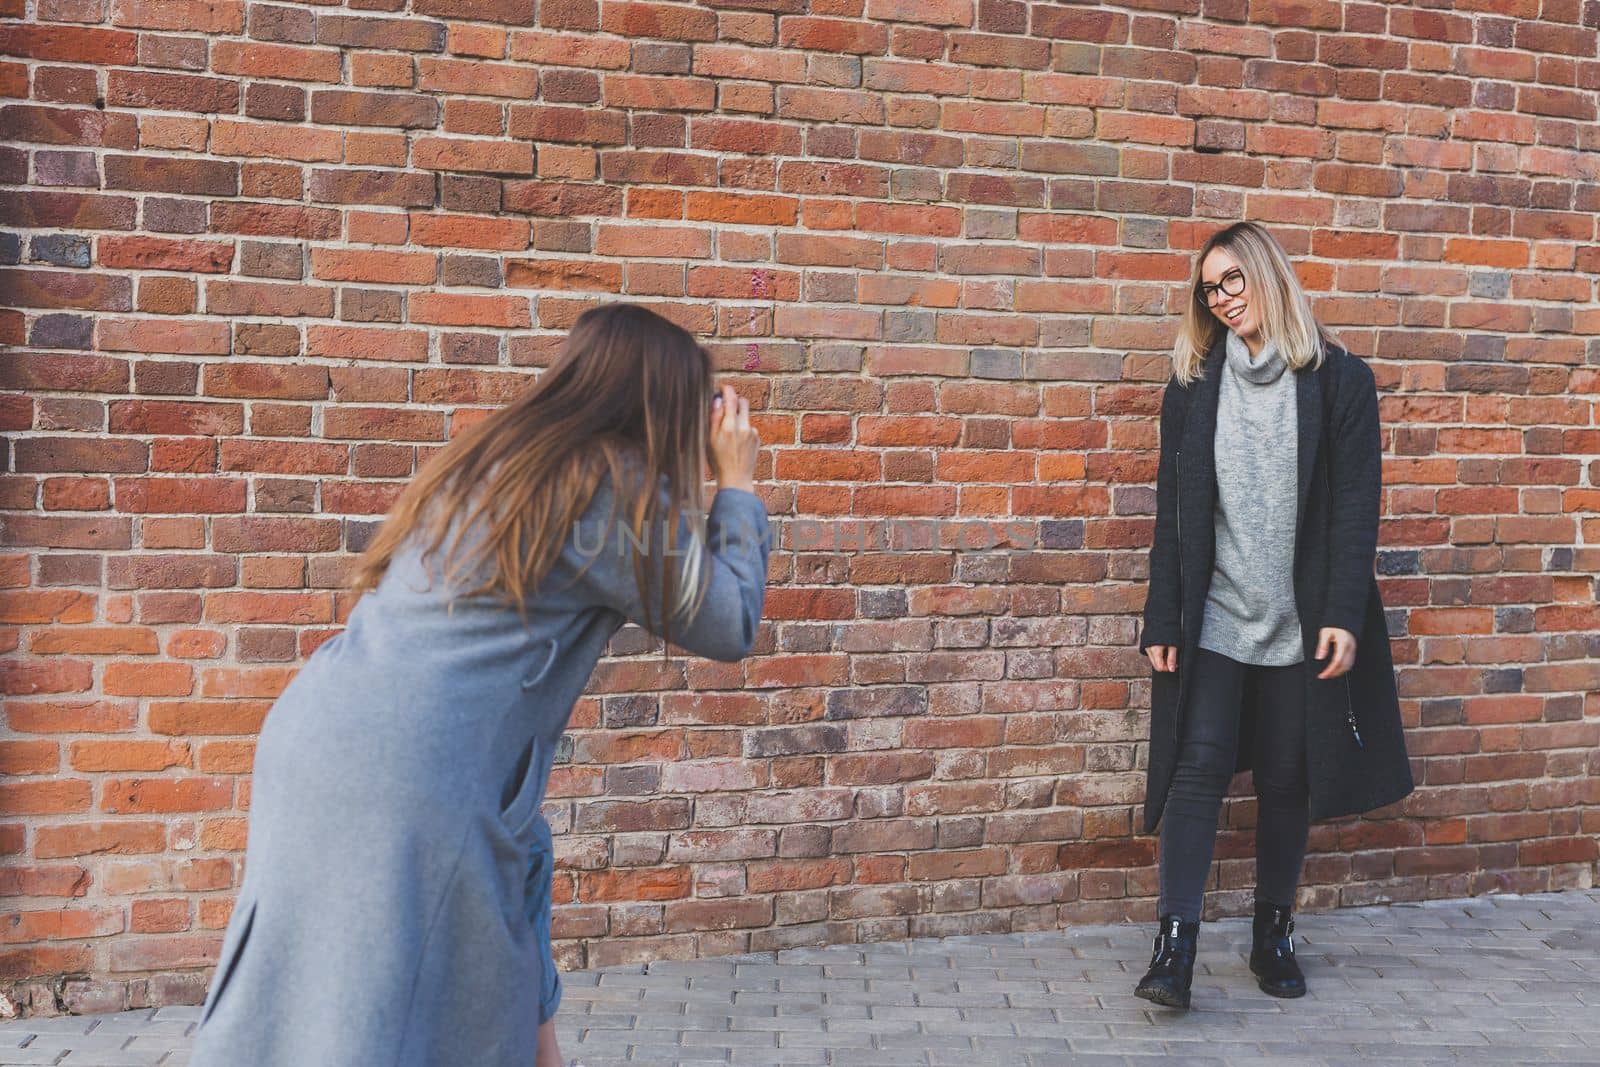 Girl takes picture of her female friend in front of brick wall in city street - photographer and vintage camera hobby concept by Satura86